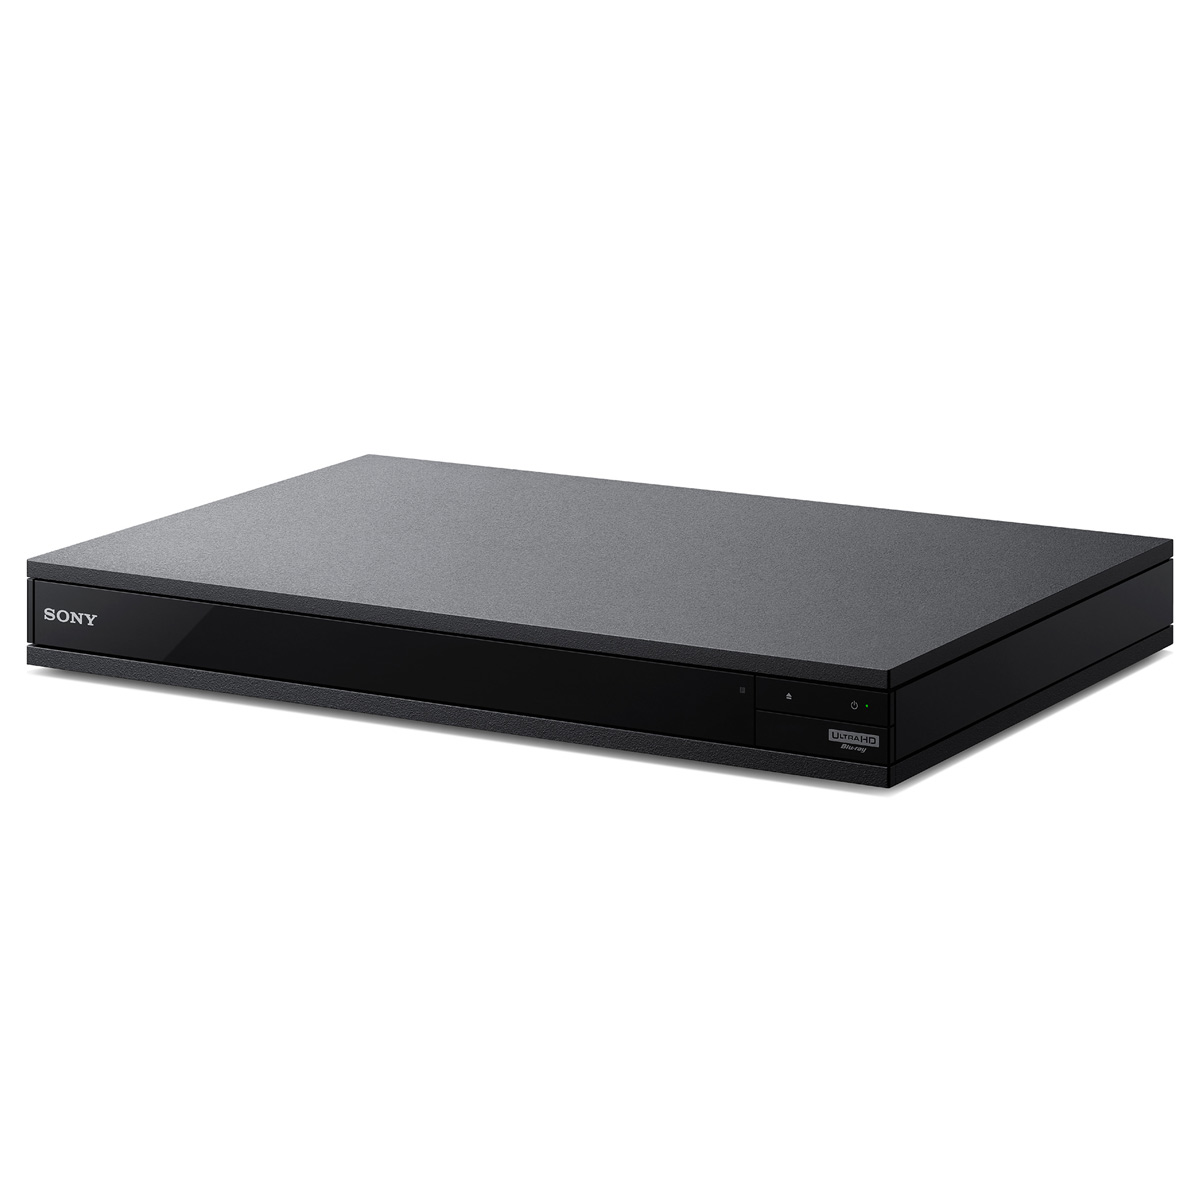 Sony UBP-X800M2 4K Ultra HD Home Theater Streaming Blu-Ray Player with High-Resolution Audio and Wi-Fi Built-In - image 4 of 6